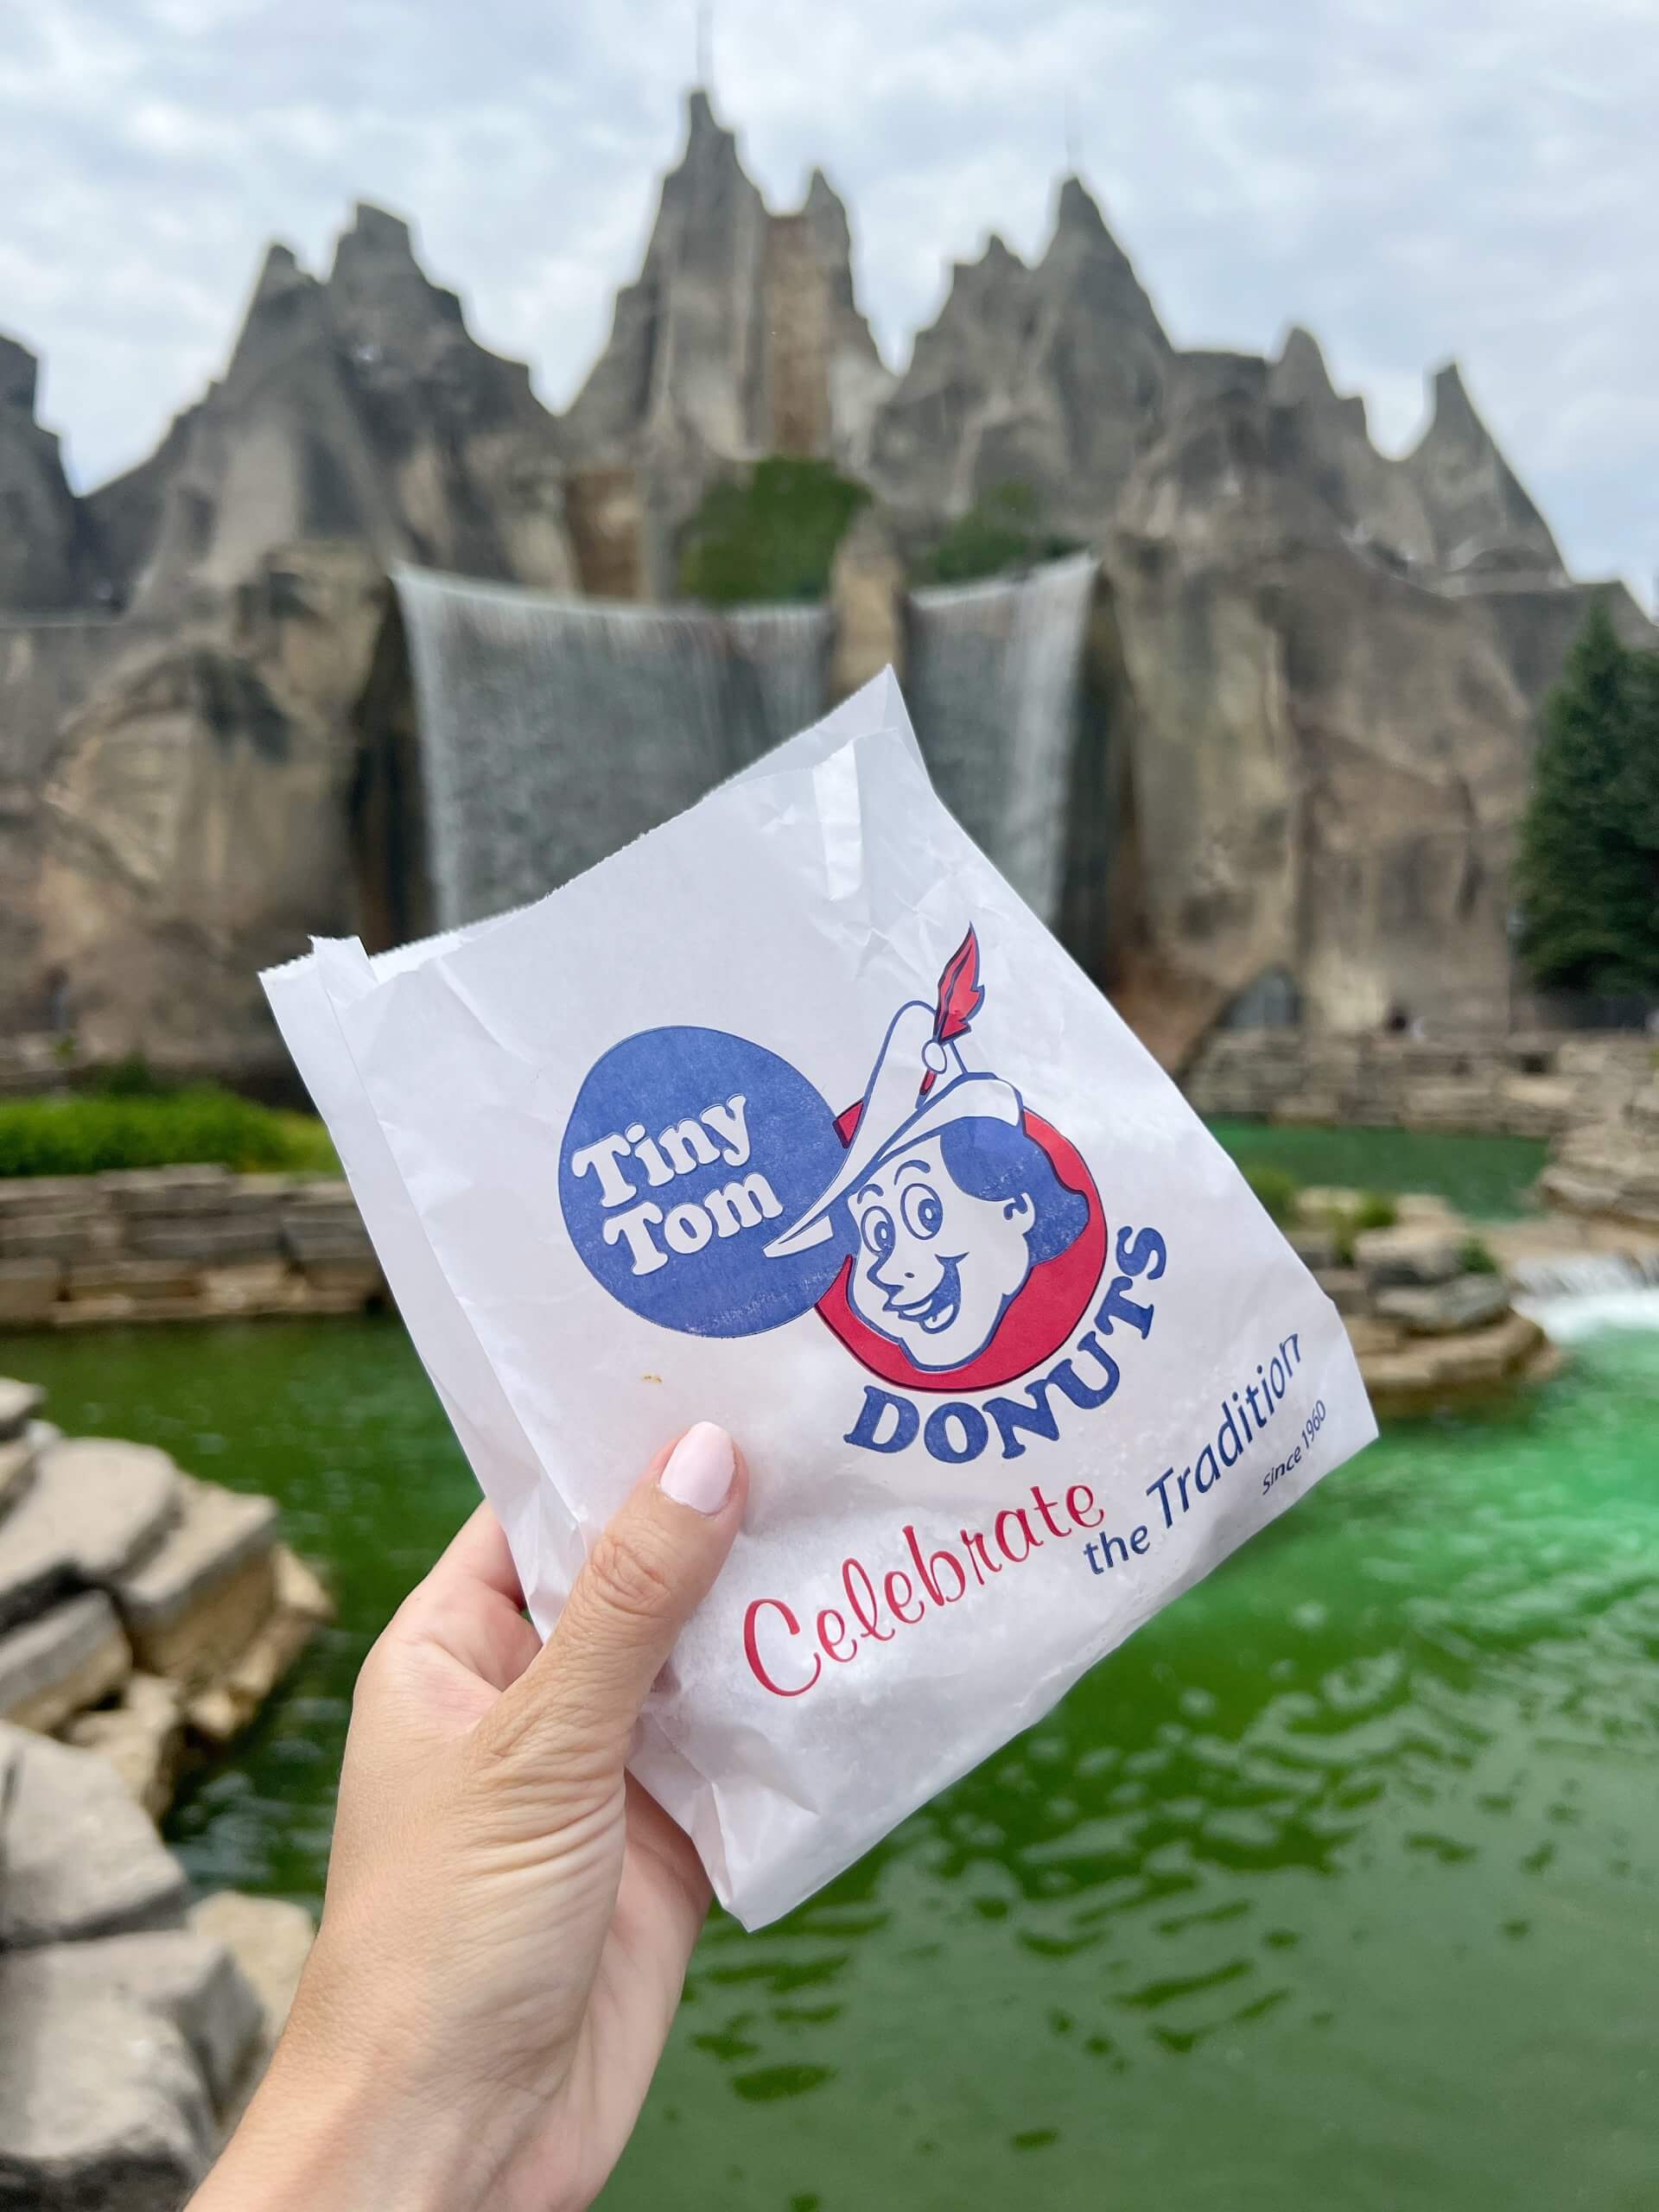 The best things to eat at Canada's Wonderland